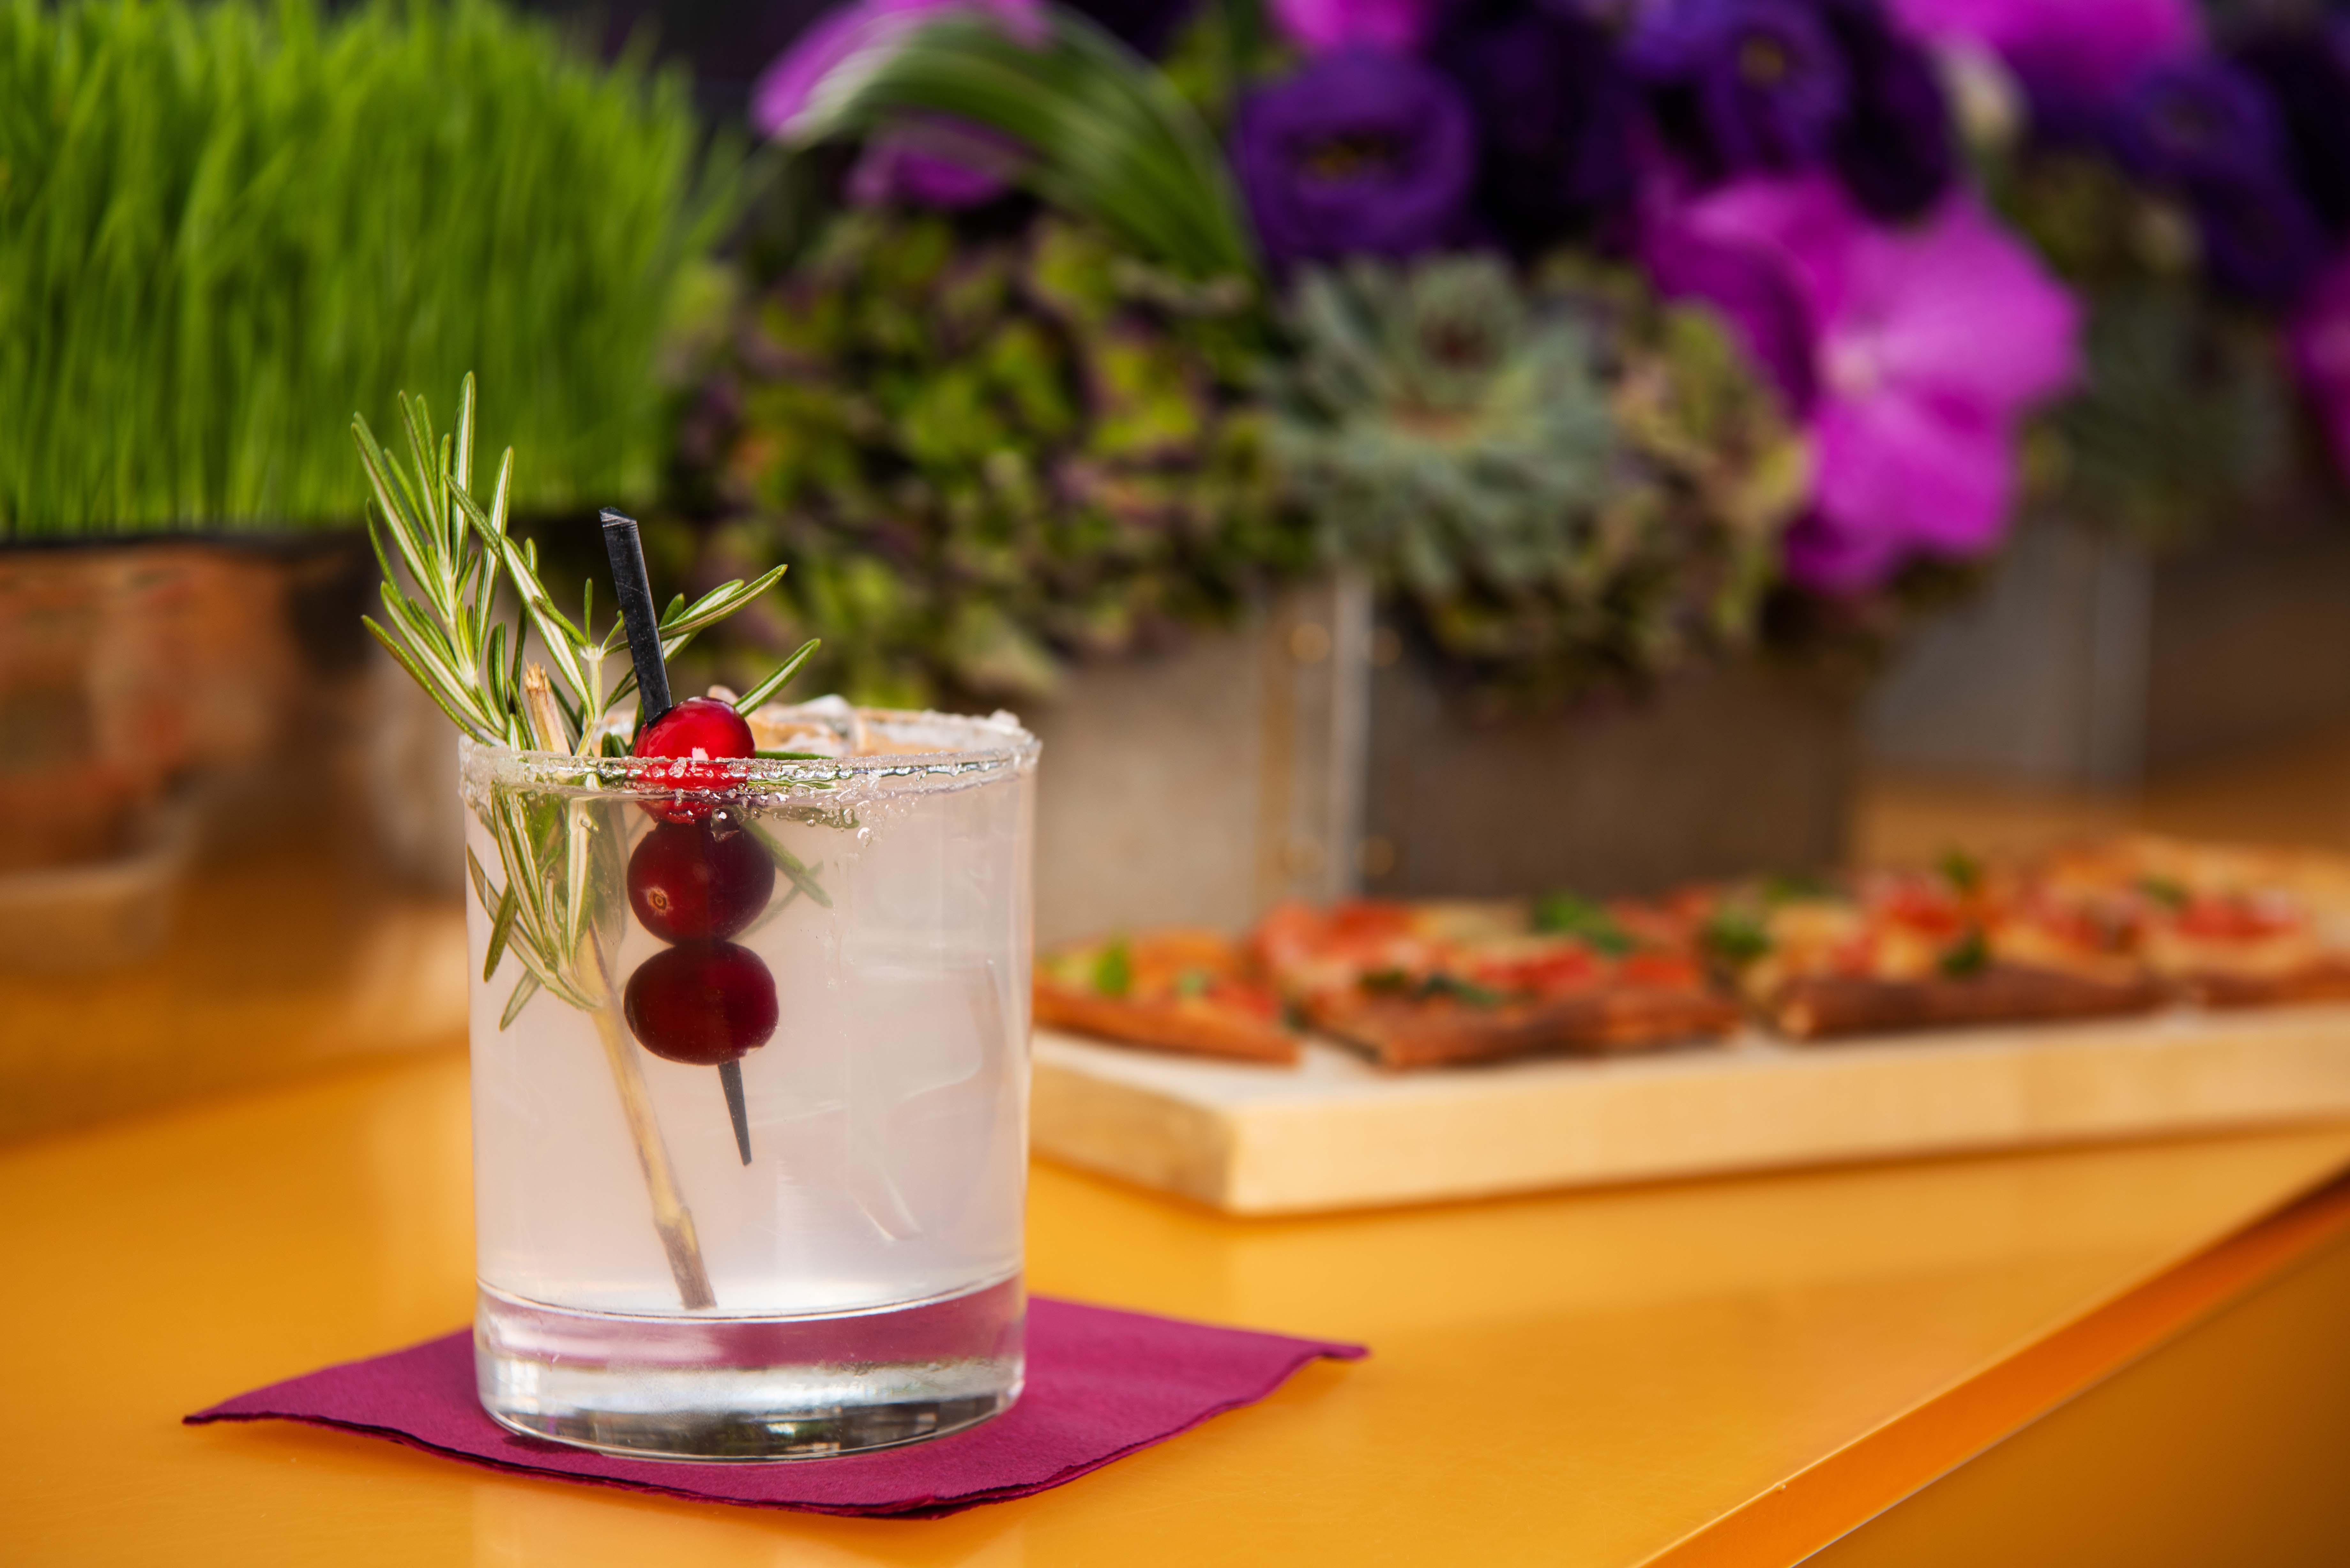 Cocktail with fruit garnish on counter with flatbread pizza